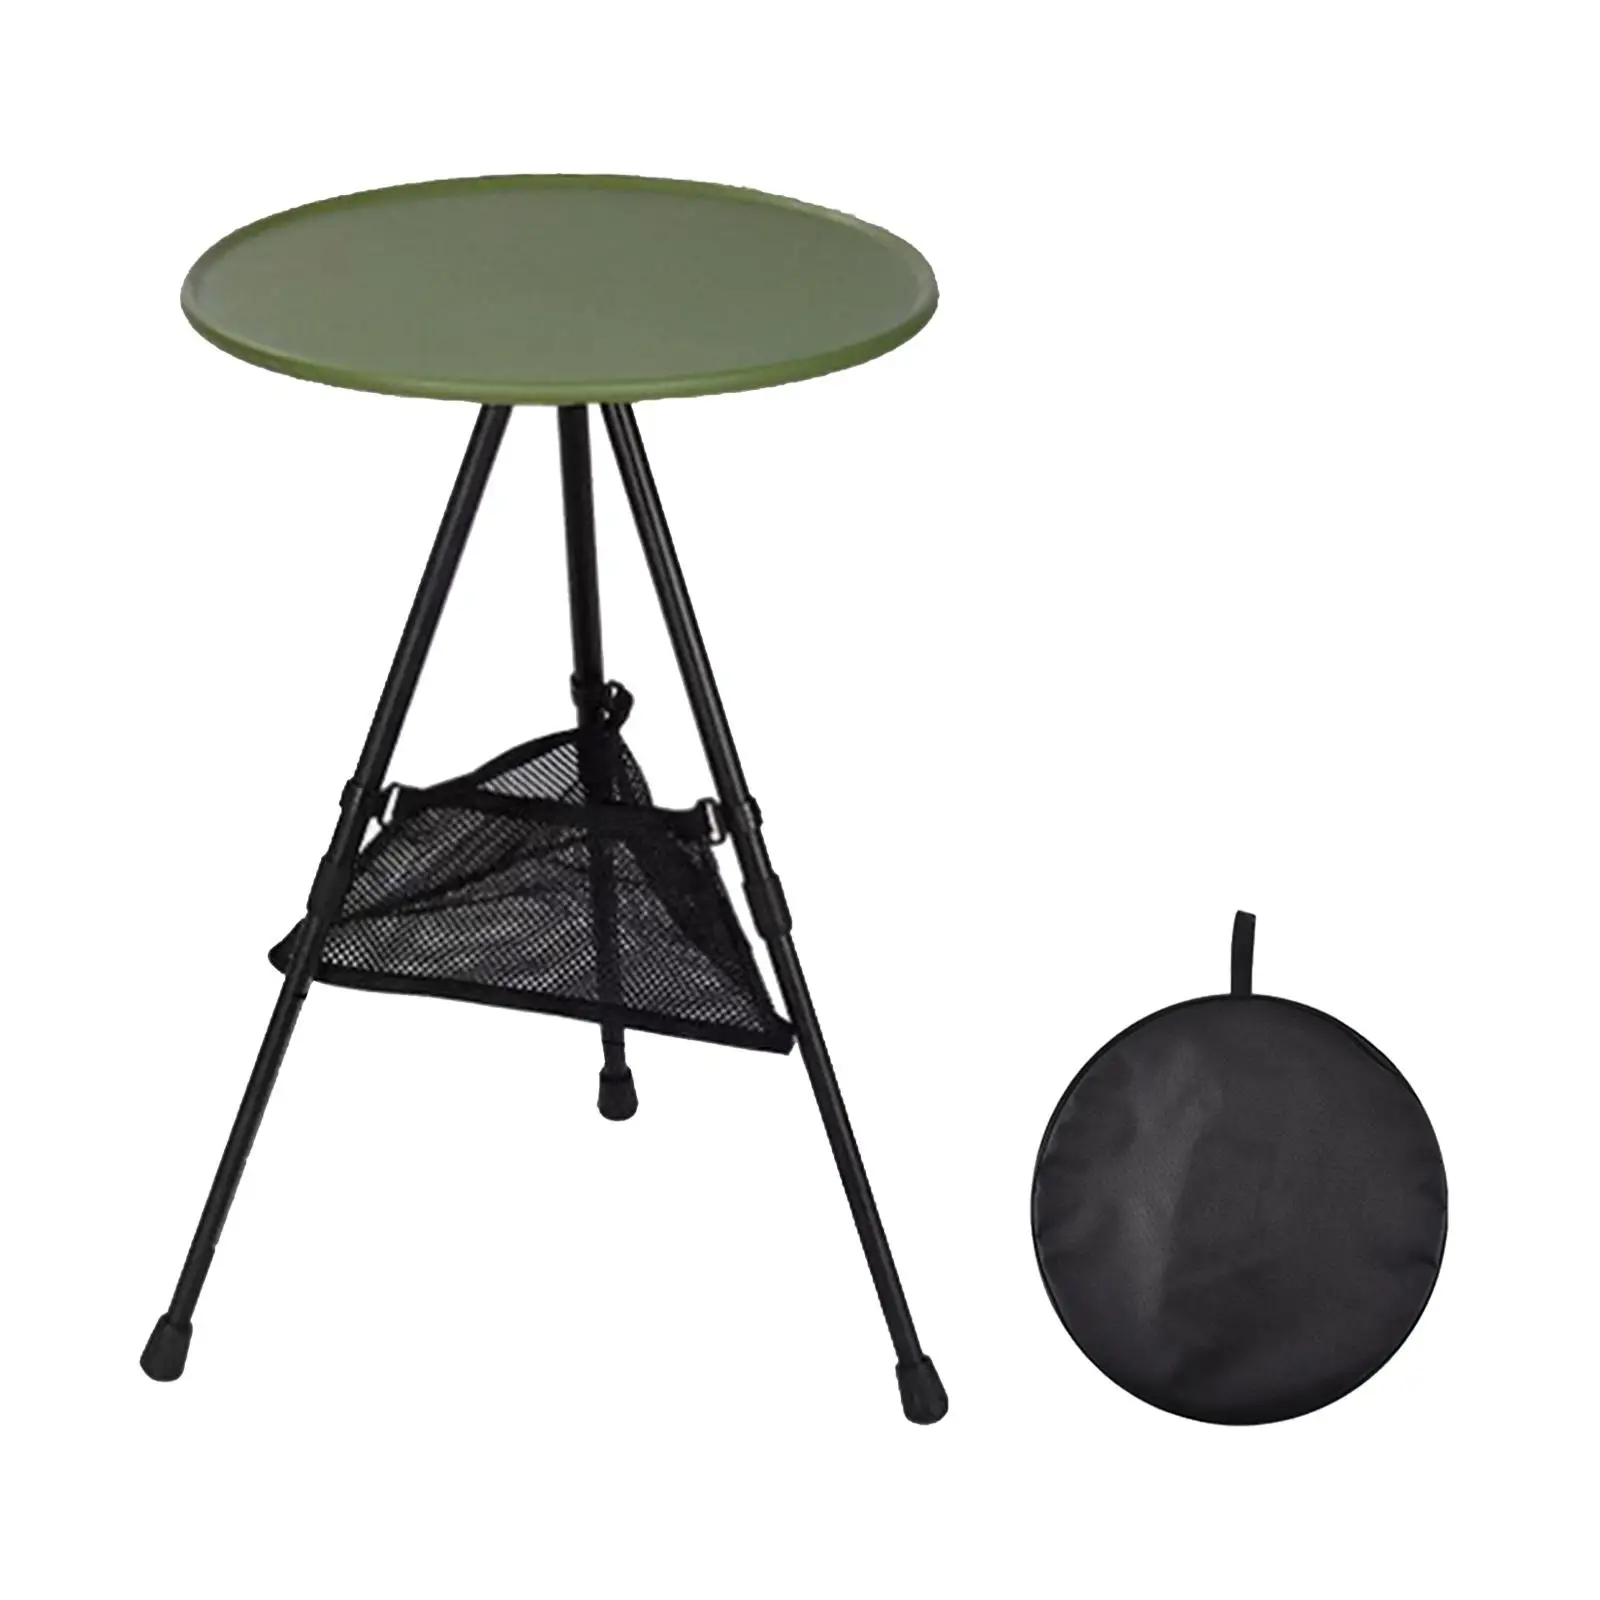 Outdoor Round Table Coffee Tea Table Small Foldable Picnic Table